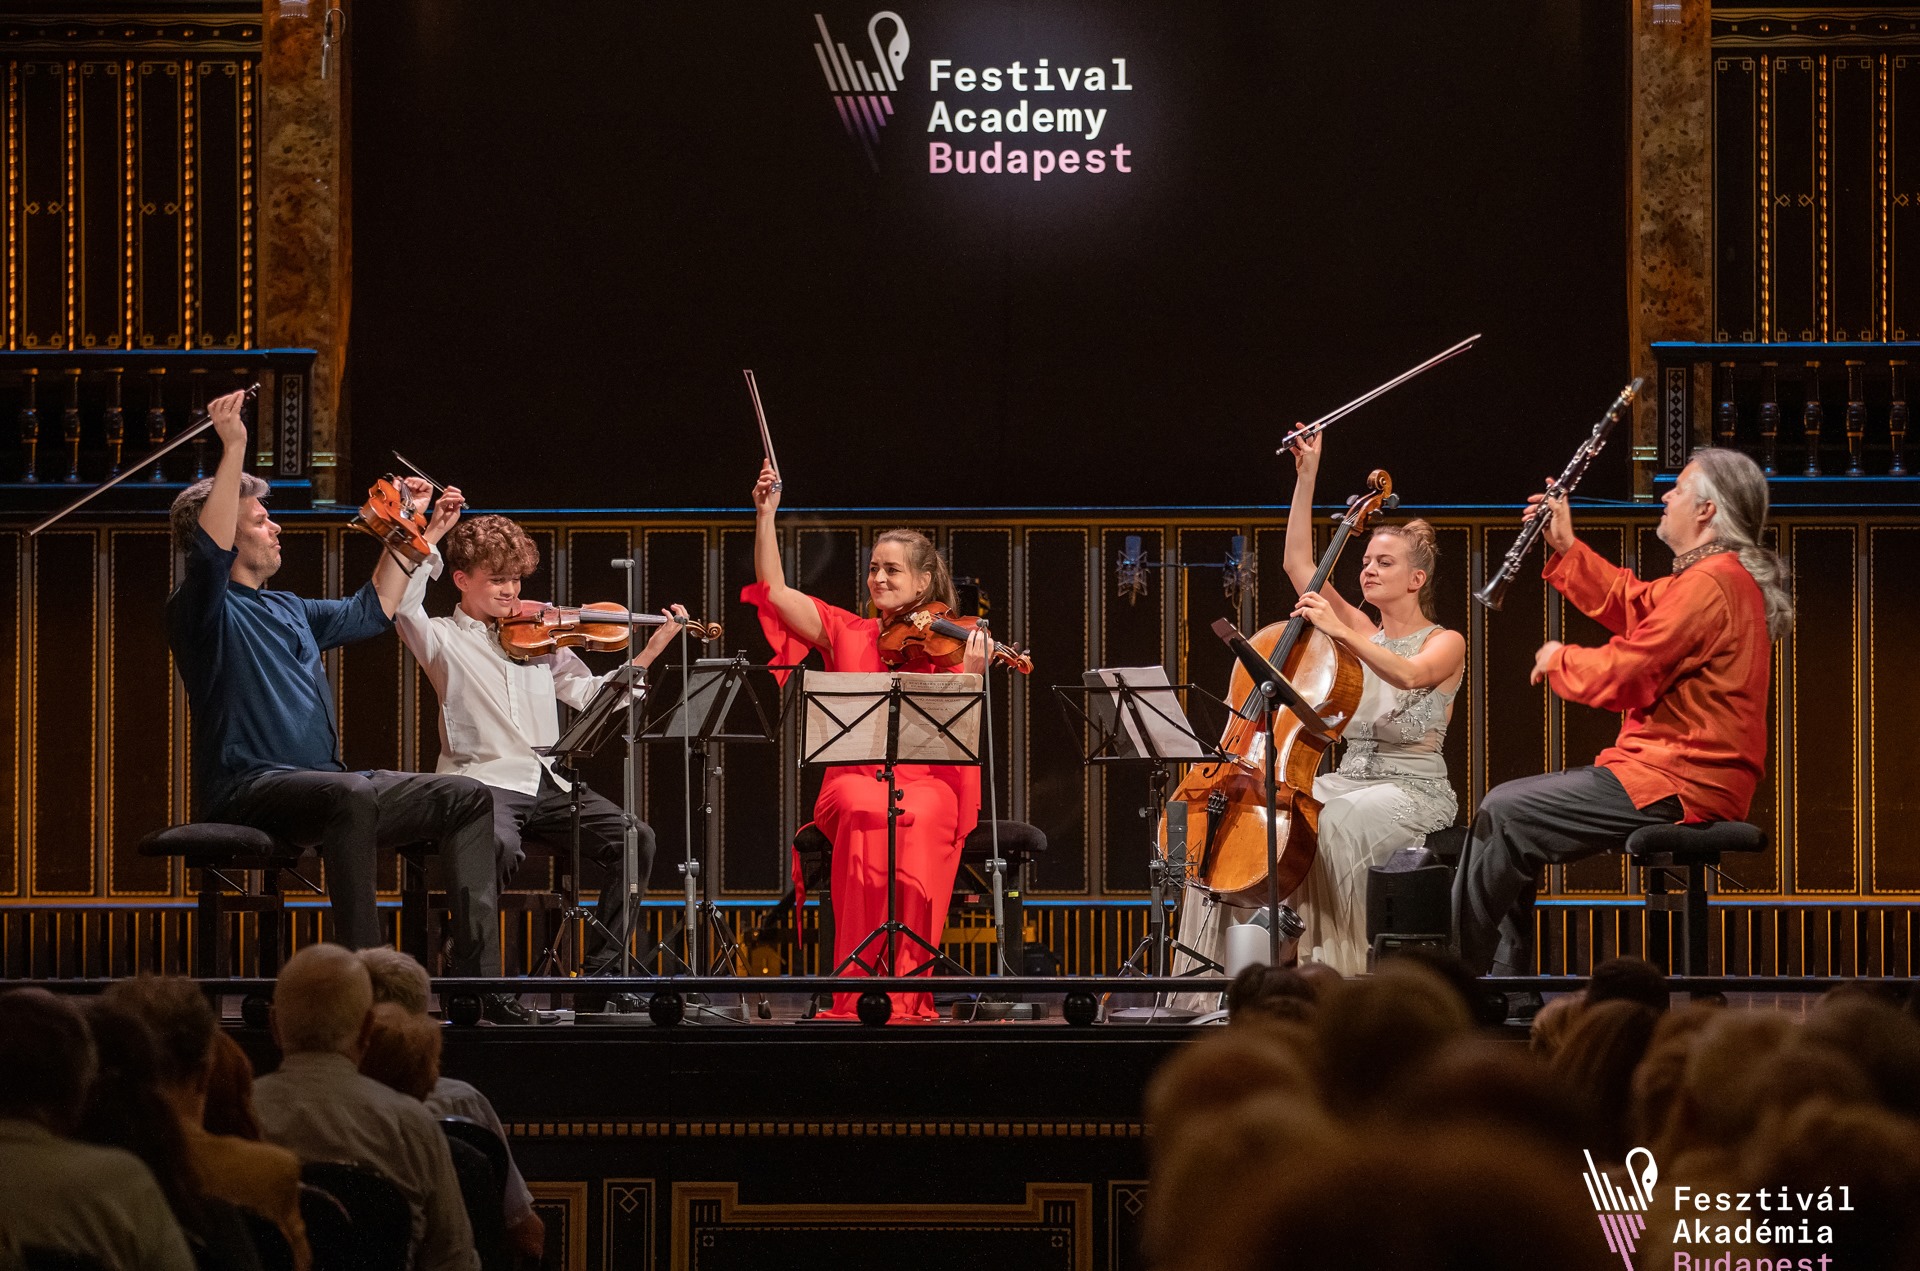 Festival Academy Budapest Chamber Music Series to be Held in Summer